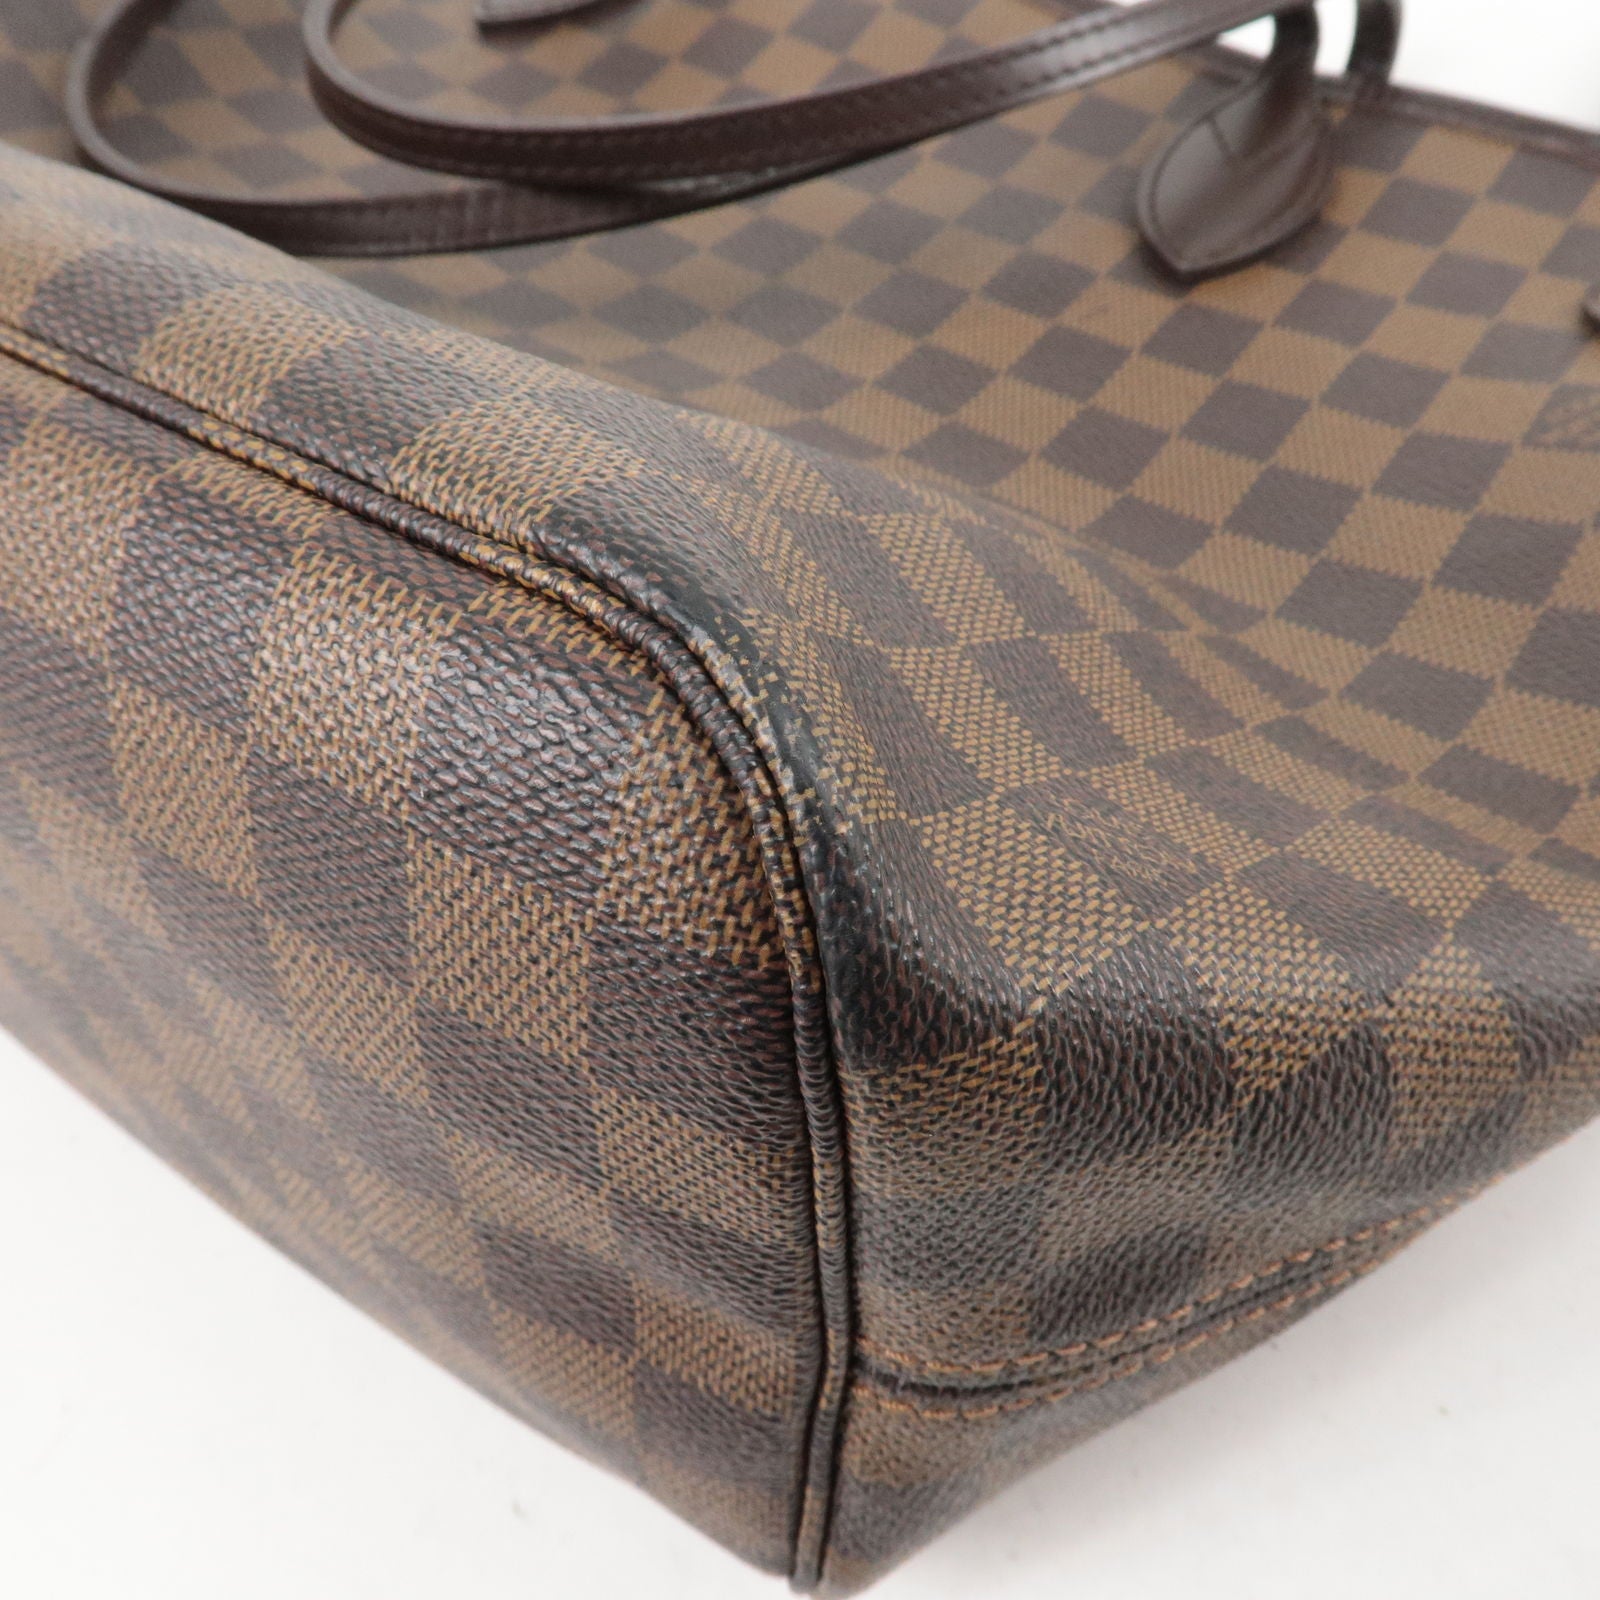 Louis Vuitton Damier Canvas and Taurillon Leather Jersey Tote Bag